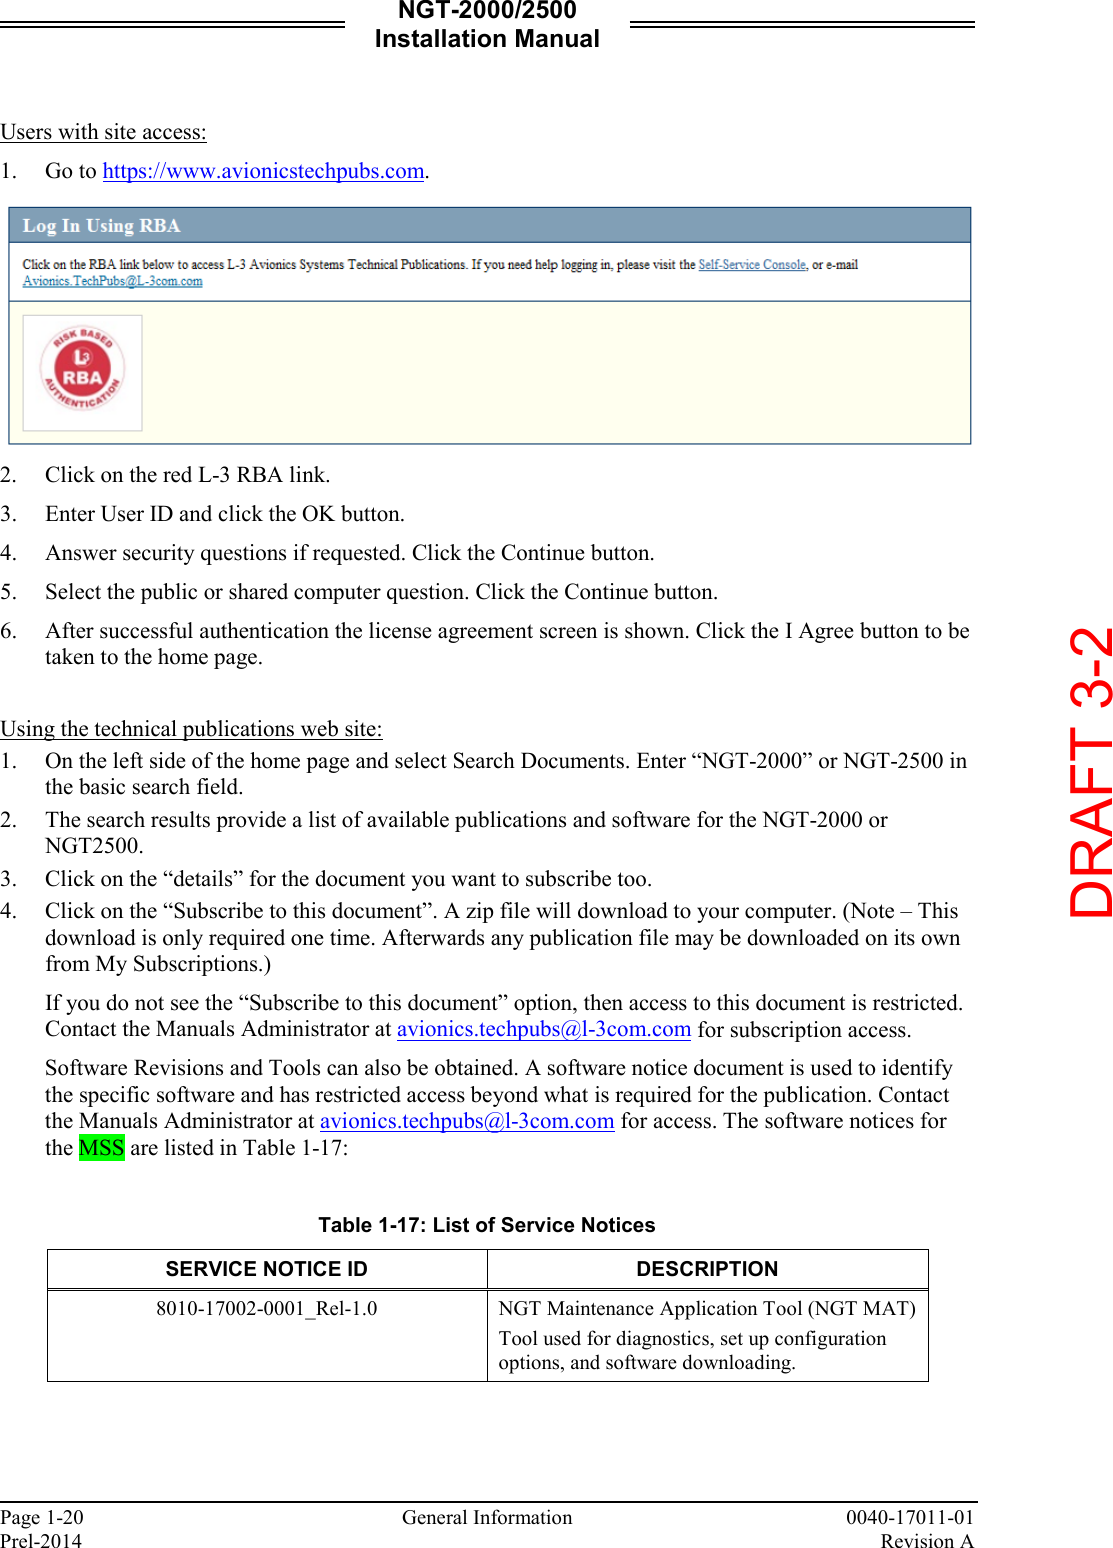 NGT-2000/2500 Installation Manual  Page 1-20     General Information 0040-17011-01 Prel-2014    Revision A  Users with site access: 1. Go to https://www.avionicstechpubs.com.   2. Click on the red L-3 RBA link. 3. Enter User ID and click the OK button.  4. Answer security questions if requested. Click the Continue button. 5. Select the public or shared computer question. Click the Continue button. 6. After successful authentication the license agreement screen is shown. Click the I Agree button to be taken to the home page.   Using the technical publications web site: 1. On the left side of the home page and select Search Documents. Enter “NGT-2000” or NGT-2500 in the basic search field.  2. The search results provide a list of available publications and software for the NGT-2000 or NGT2500.  3. Click on the “details” for the document you want to subscribe too.  4. Click on the “Subscribe to this document”. A zip file will download to your computer. (Note – This download is only required one time. Afterwards any publication file may be downloaded on its own from My Subscriptions.) If you do not see the “Subscribe to this document” option, then access to this document is restricted. Contact the Manuals Administrator at avionics.techpubs@l-3com.com for subscription access. Software Revisions and Tools can also be obtained. A software notice document is used to identify the specific software and has restricted access beyond what is required for the publication. Contact the Manuals Administrator at avionics.techpubs@l-3com.com for access. The software notices for the MSS are listed in Table 1-17:   Table 1-17: List of Service Notices SERVICE NOTICE ID DESCRIPTION 8010-17002-0001_Rel-1.0 NGT Maintenance Application Tool (NGT MAT) Tool used for diagnostics, set up configuration options, and software downloading.      DRAFT 3-2